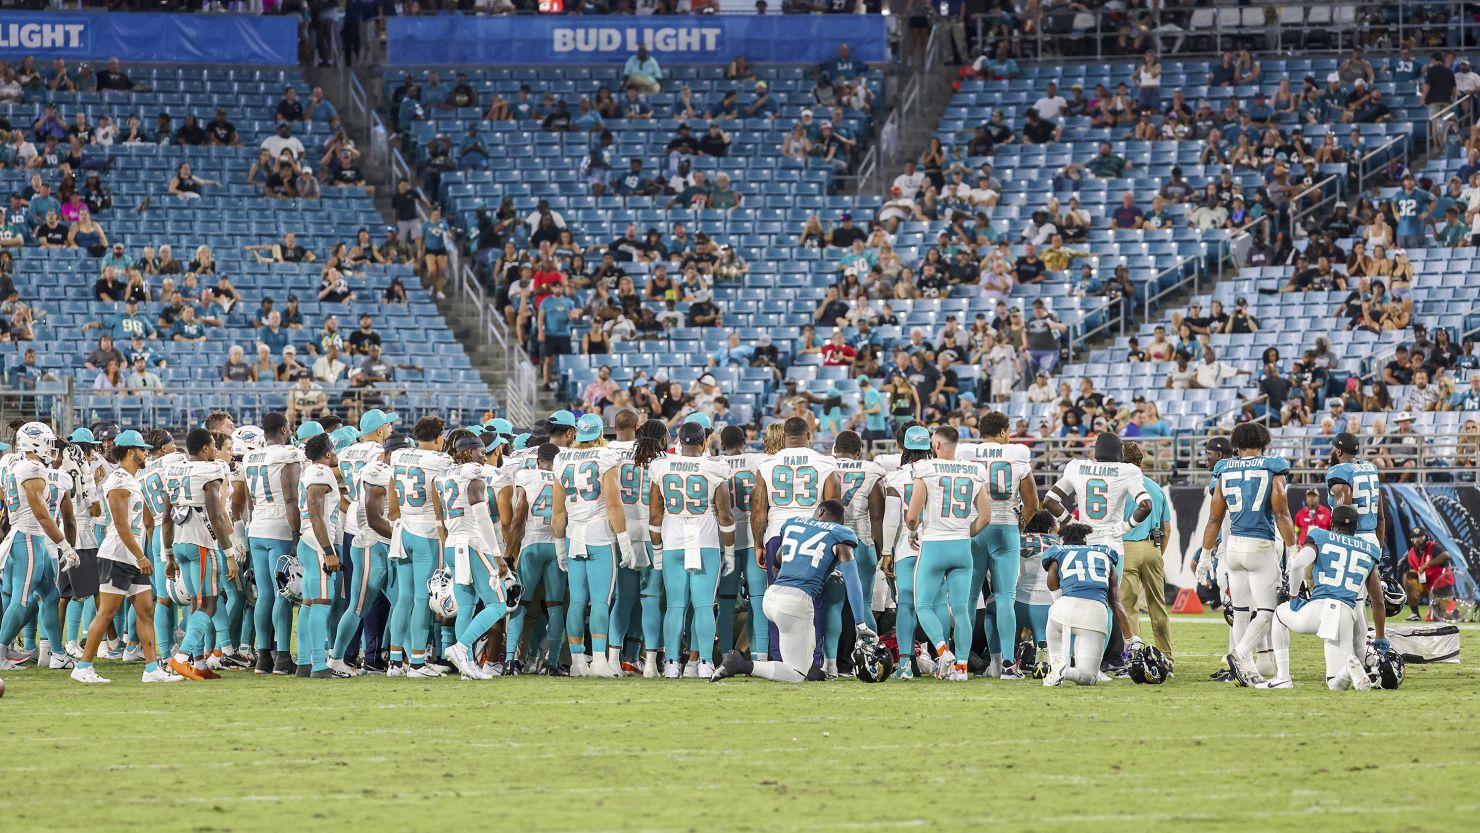 Players gather on the field after an injury to Miami Dolphins wide receiver Daewood Davis during the second half of an NFL preseason football game against the Jacksonville Jaguars Saturday in Jacksonville.